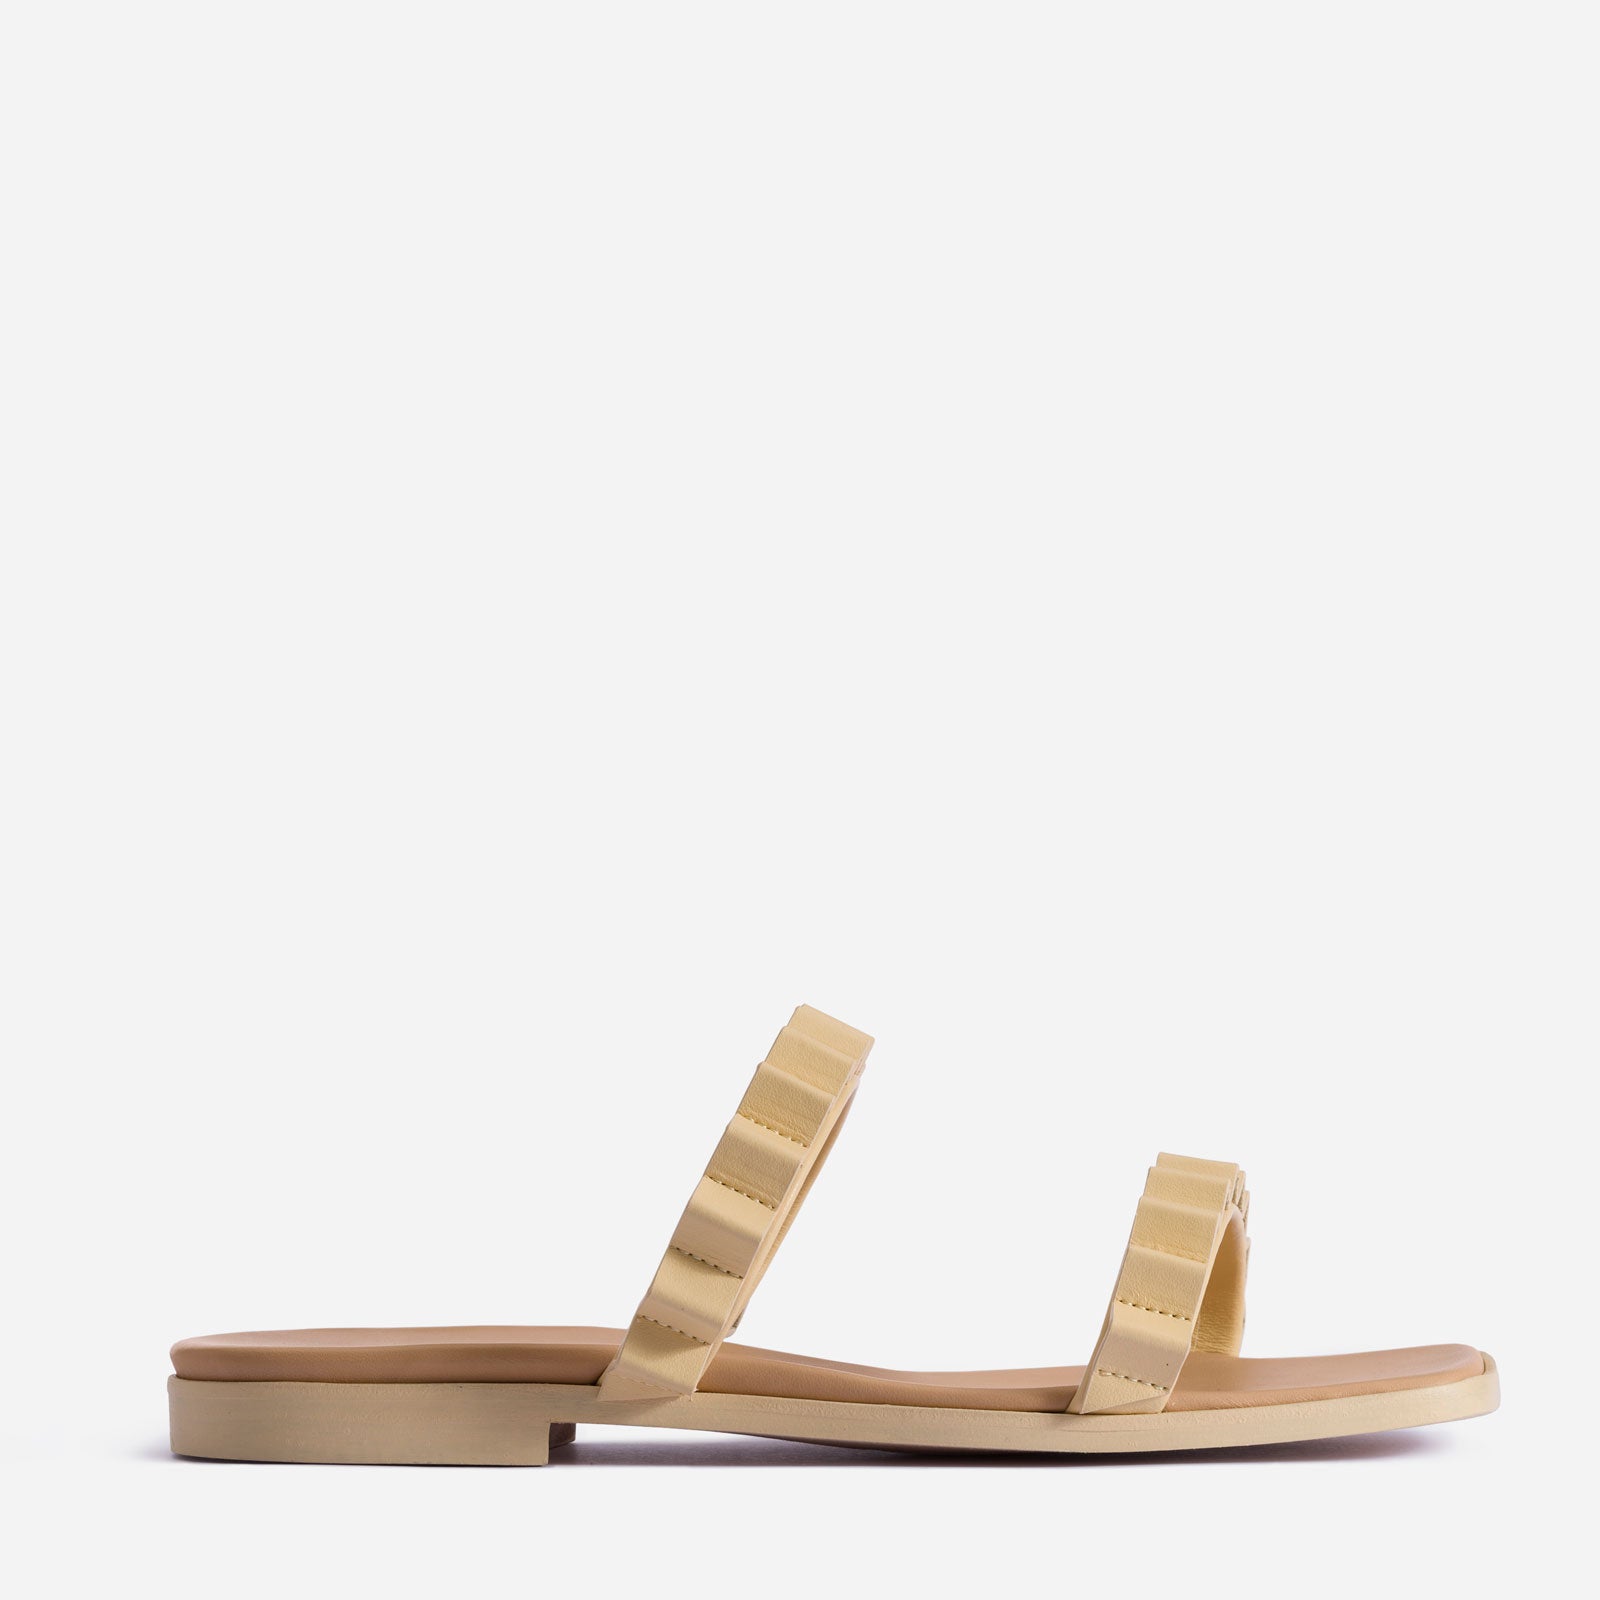 Thelma Sandal - Butter